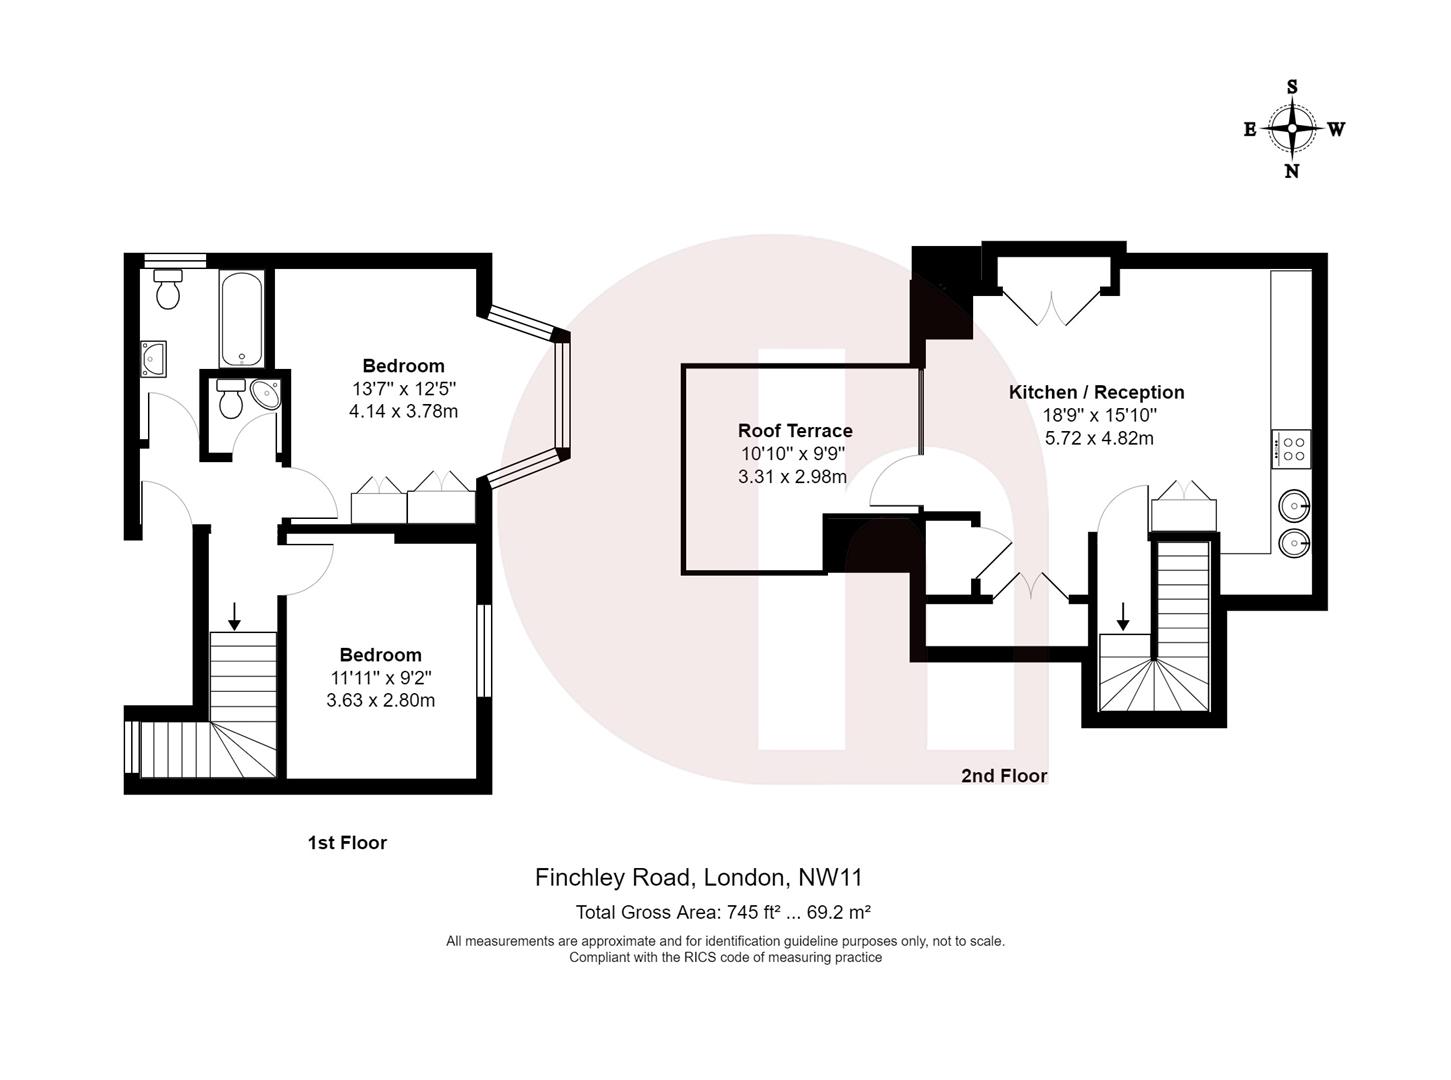 Floorplan for Finchley Road, NW11